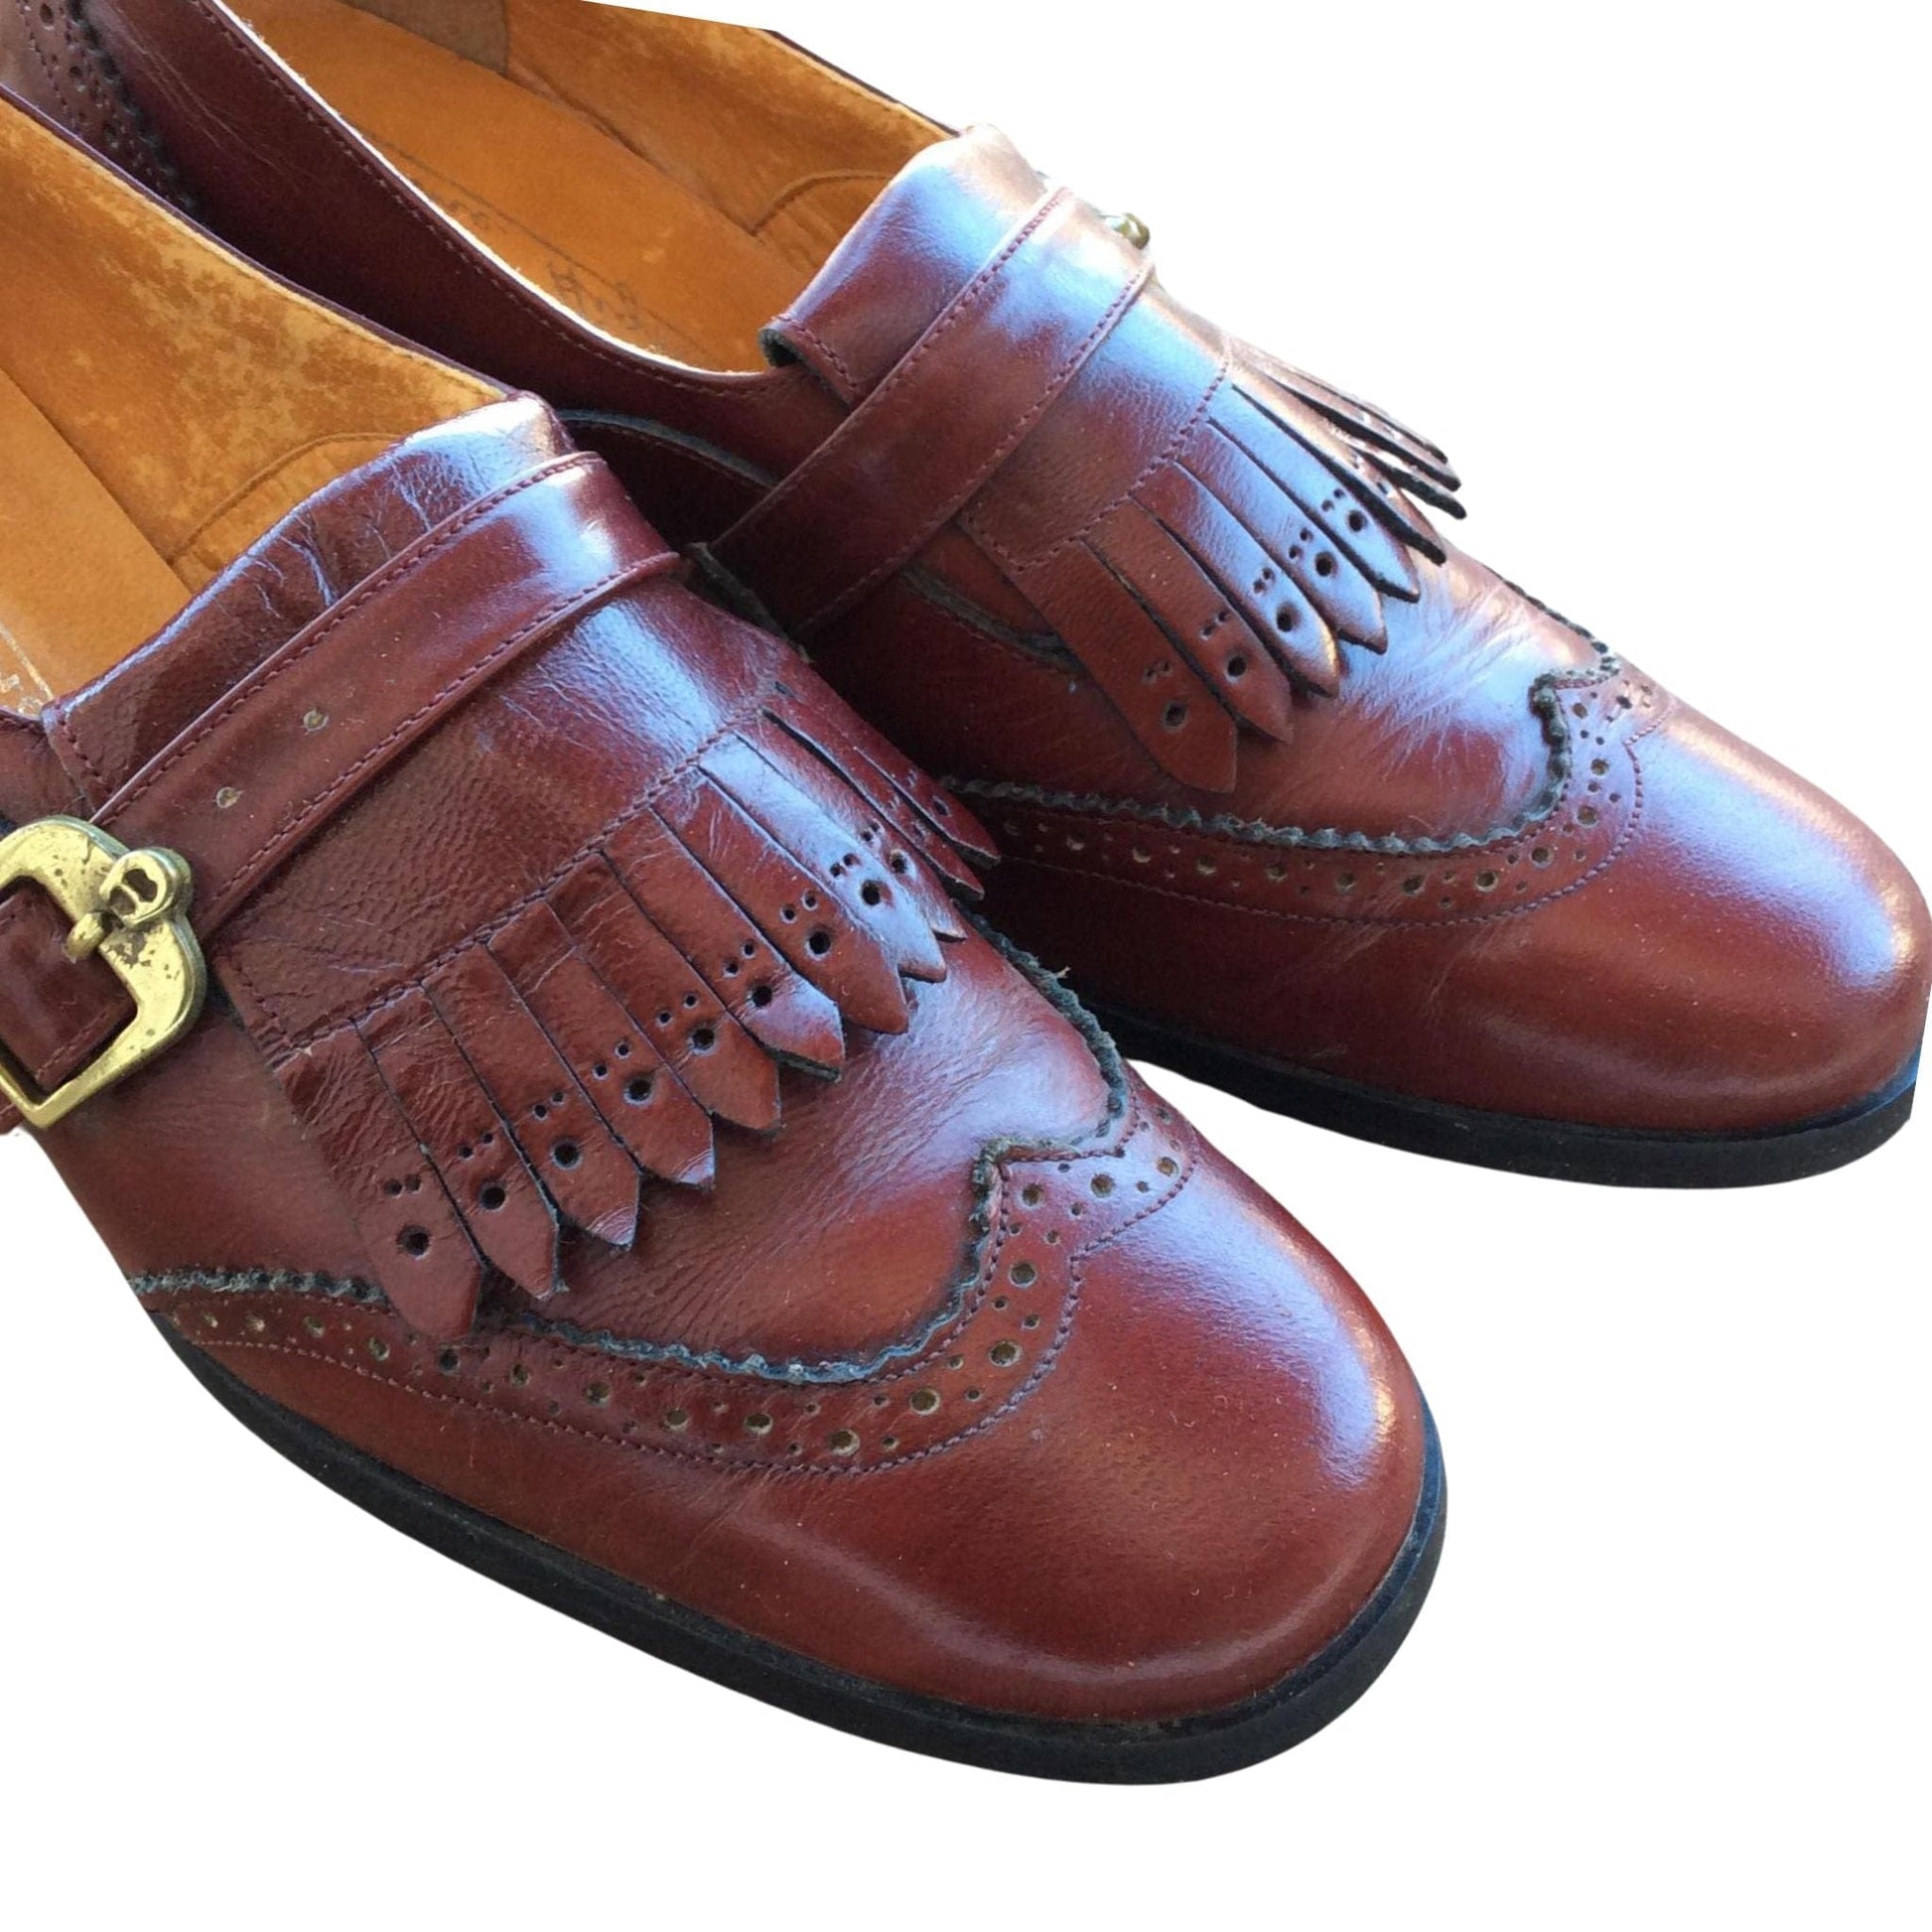 Etienne Aigner Kilted Loafers 7.5 / Burgundy / Classic